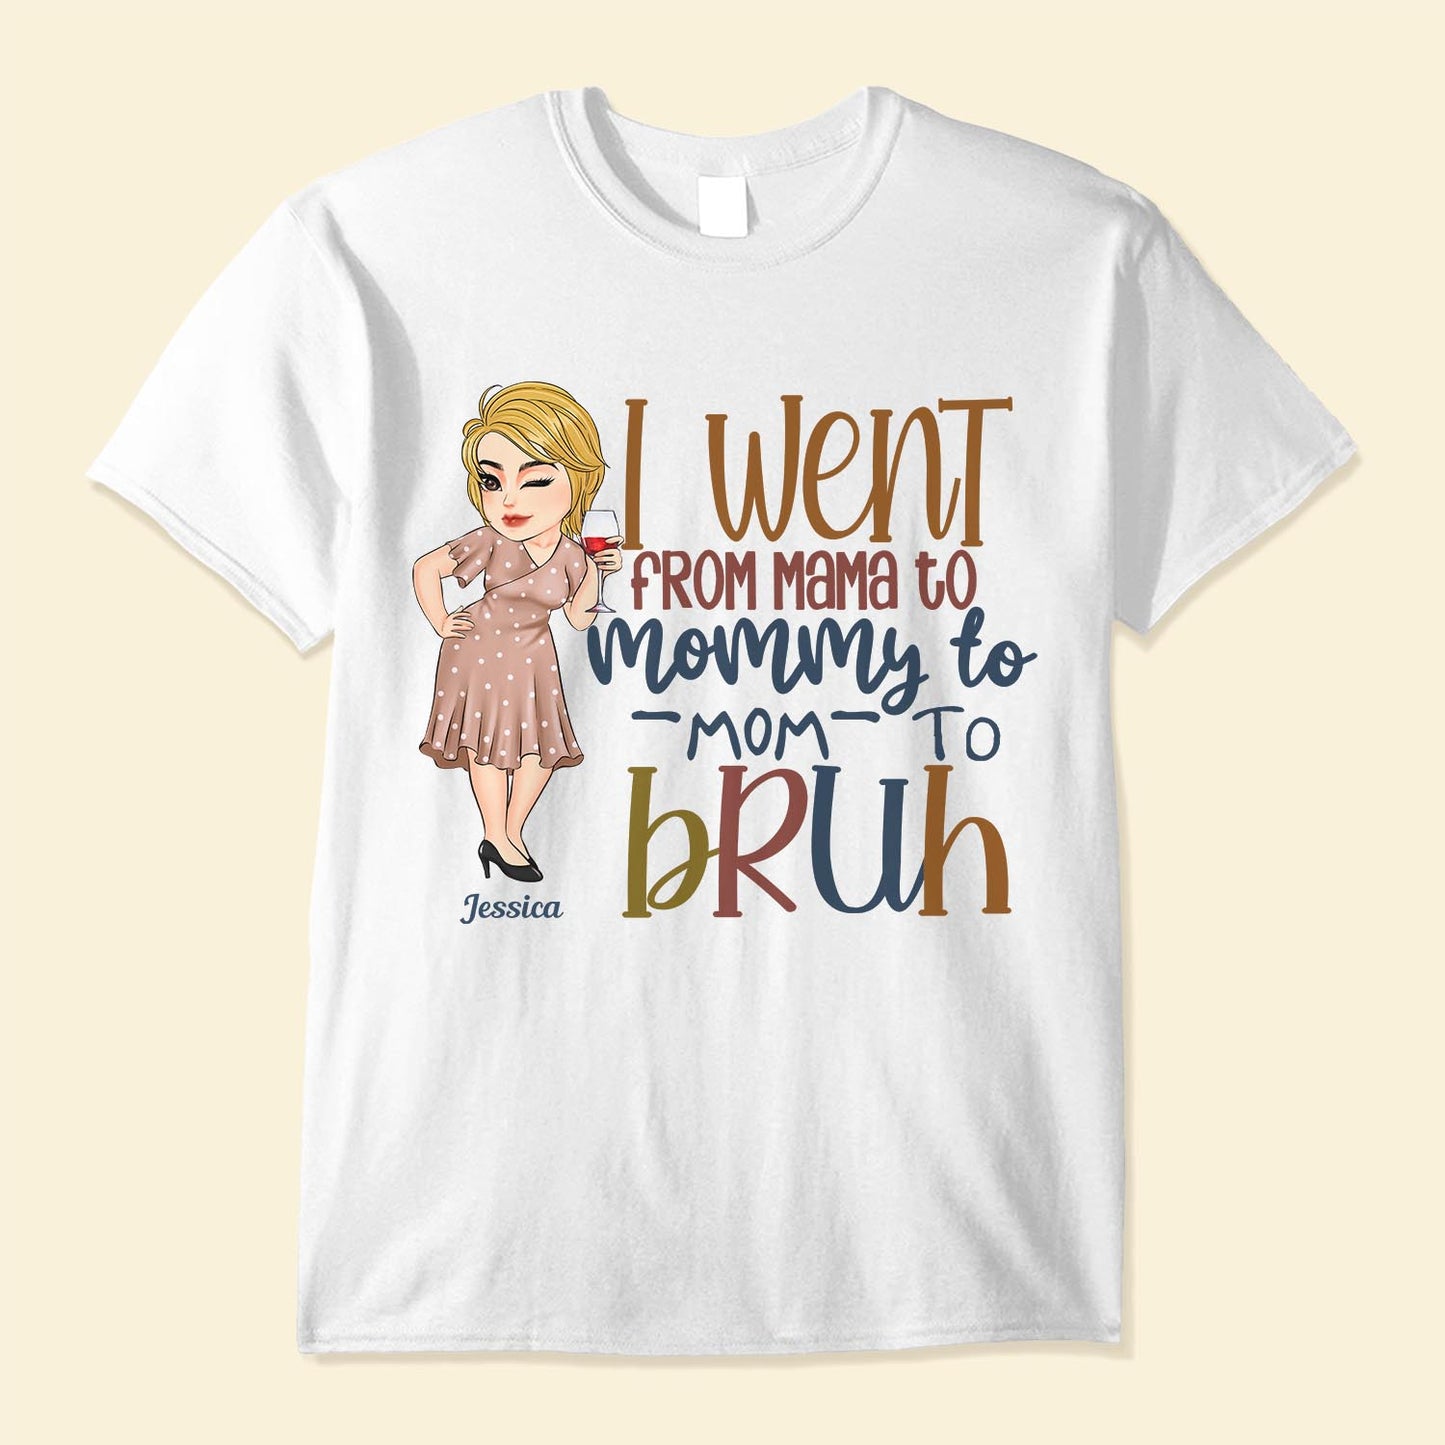 Went From Mama To Bruh - Personalized Shirt - Funny, Birthday, Mother's Day Gift For Mother, Mom, Grandma